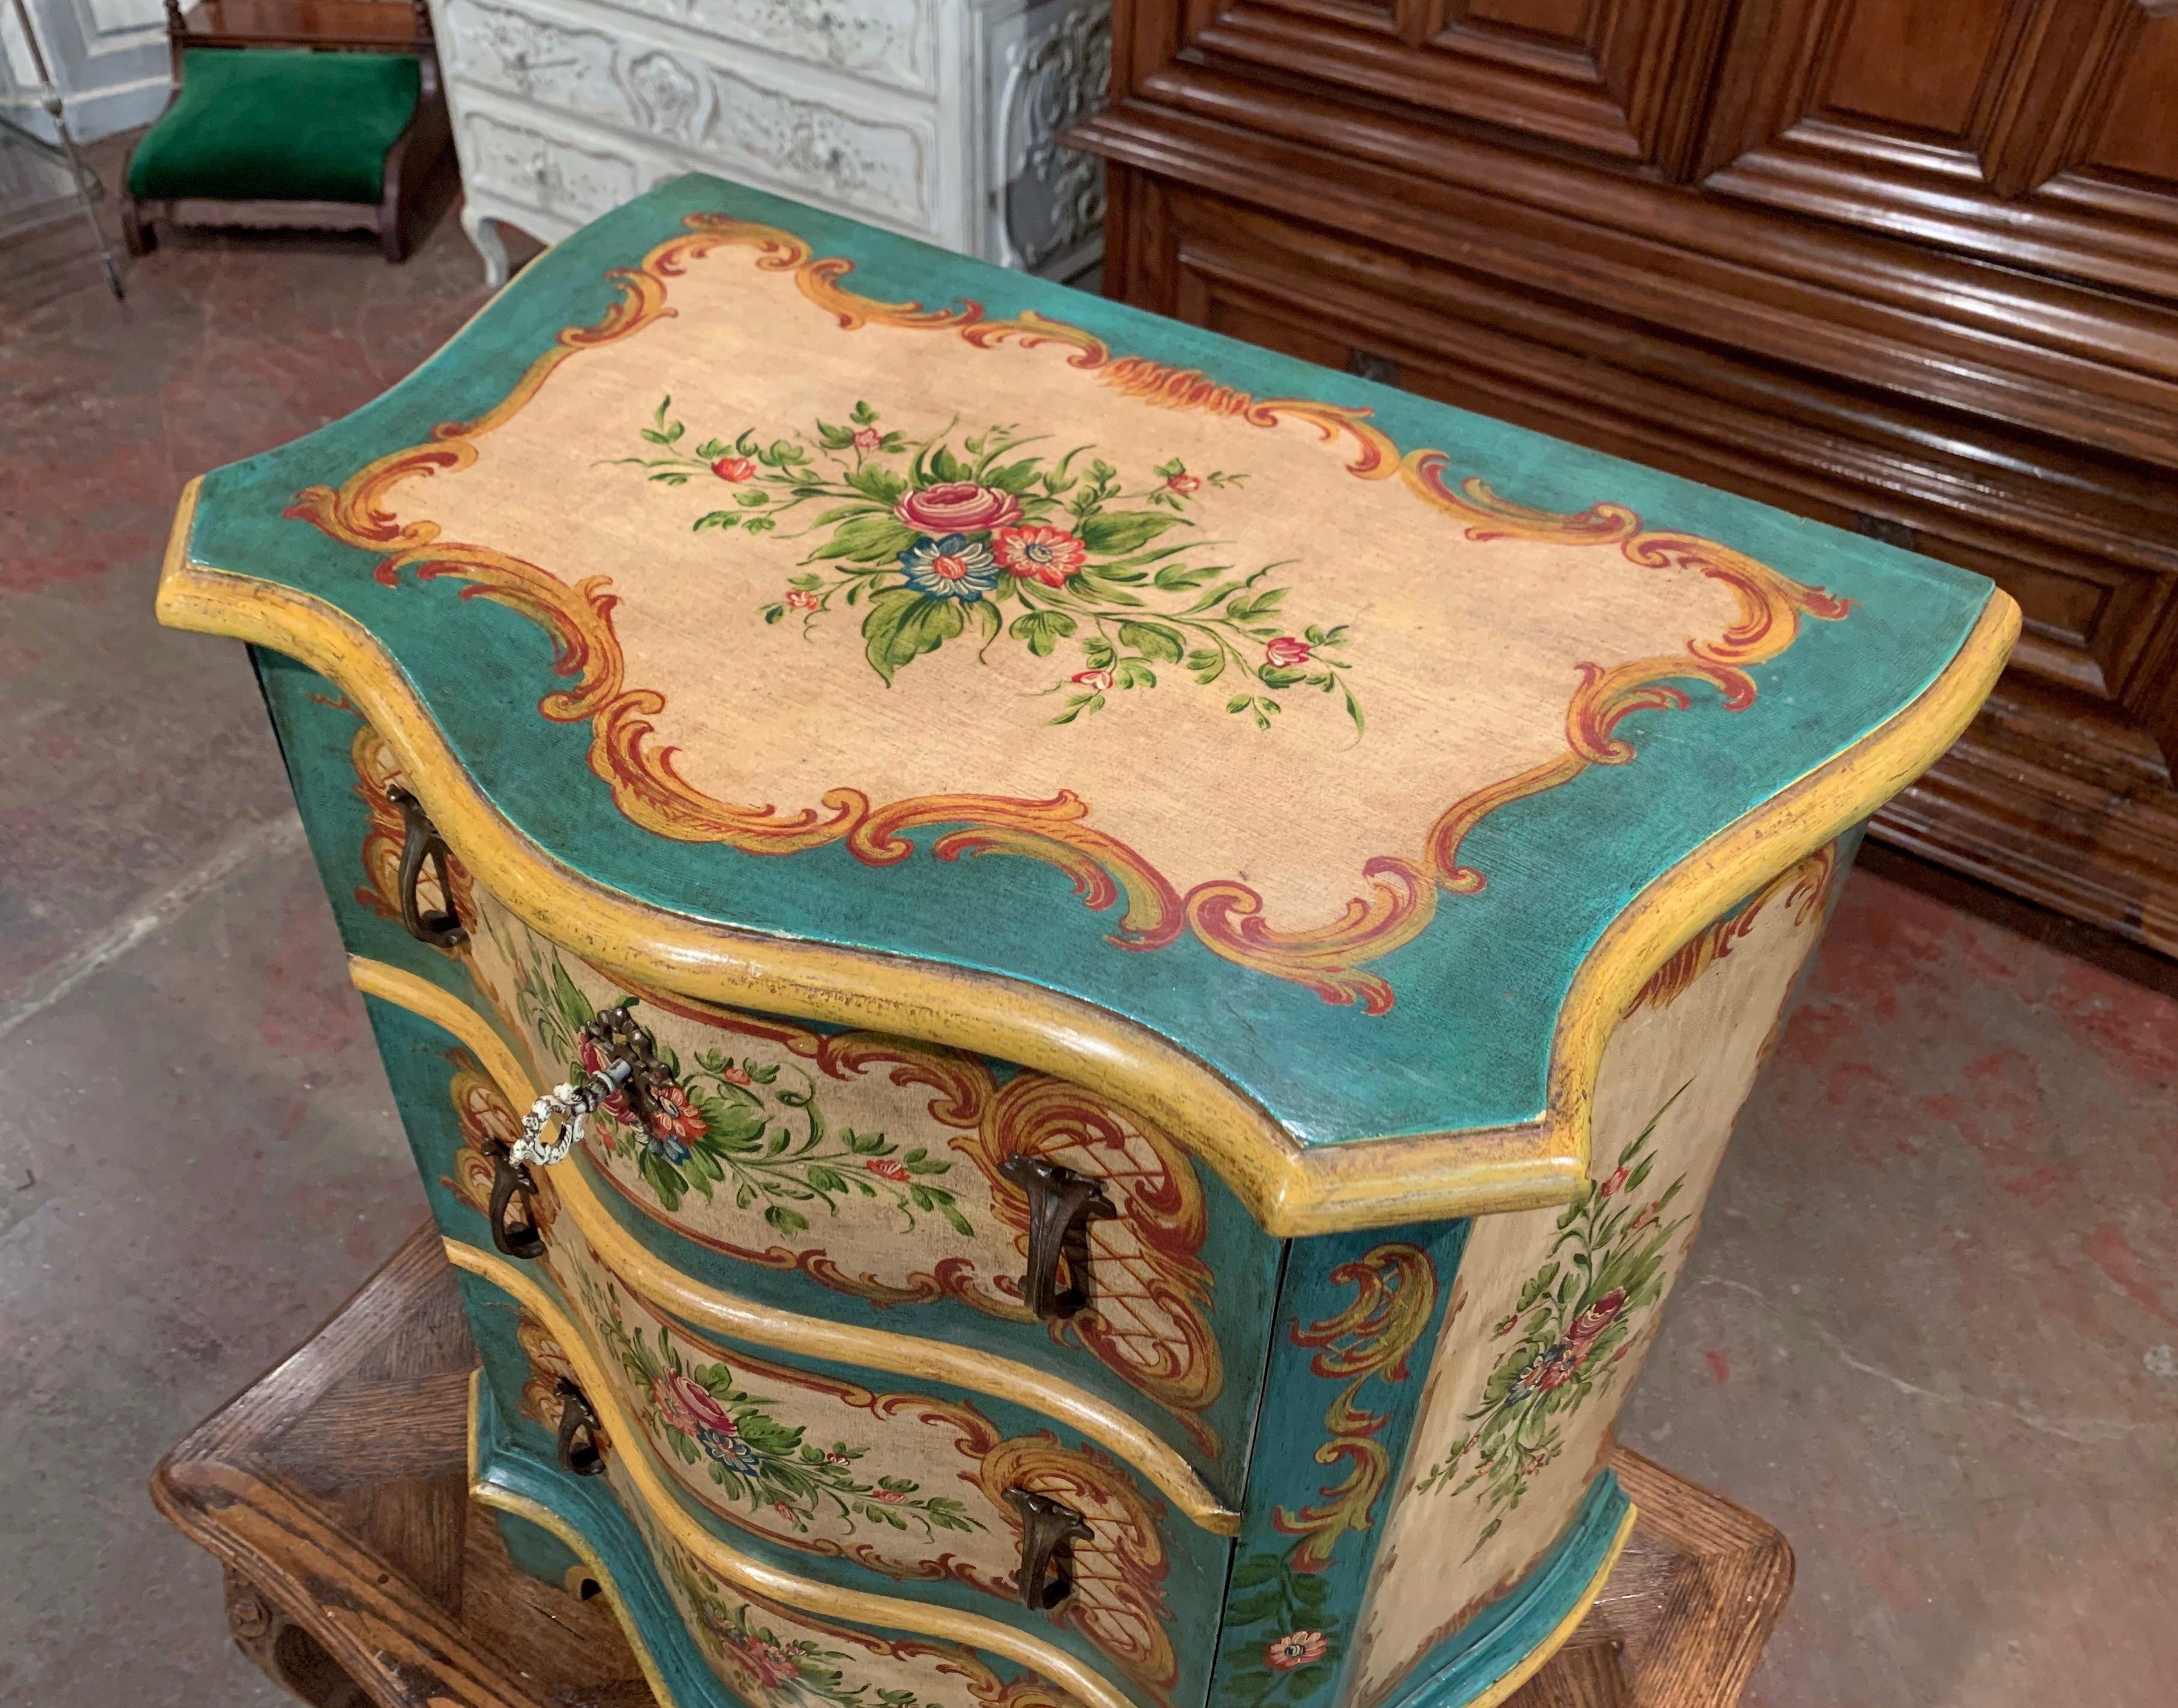 Oak Mid-20th Century Venetian Serpentine Chest of Drawers with Painted Floral Decor